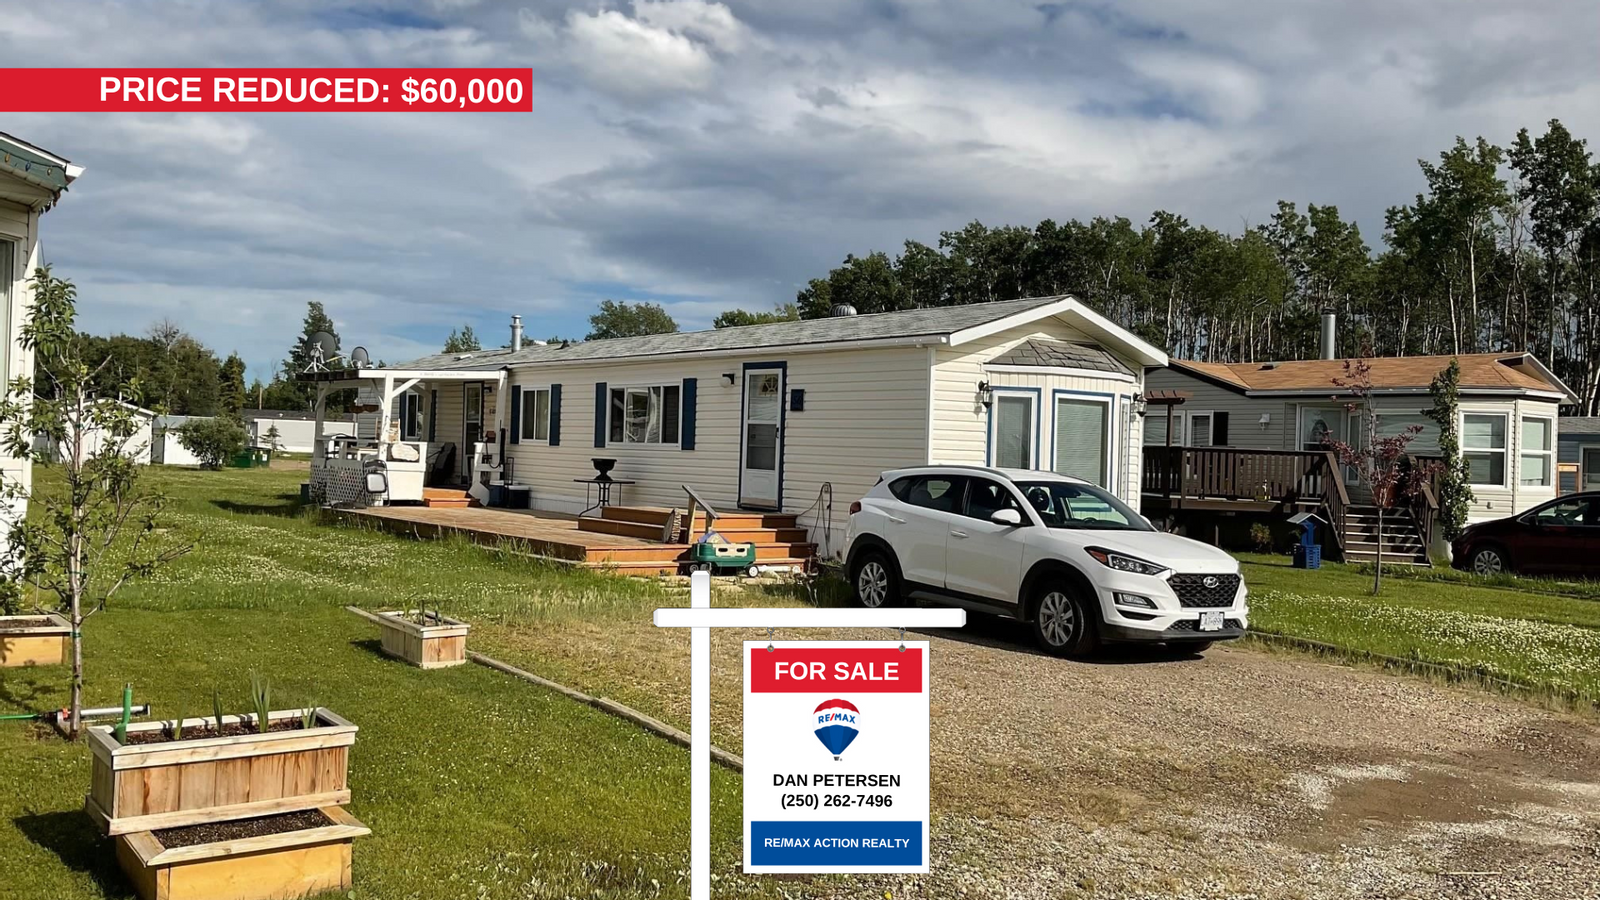 PRICE REDUCED: 2 Beds | 2 Baths Mobile Home